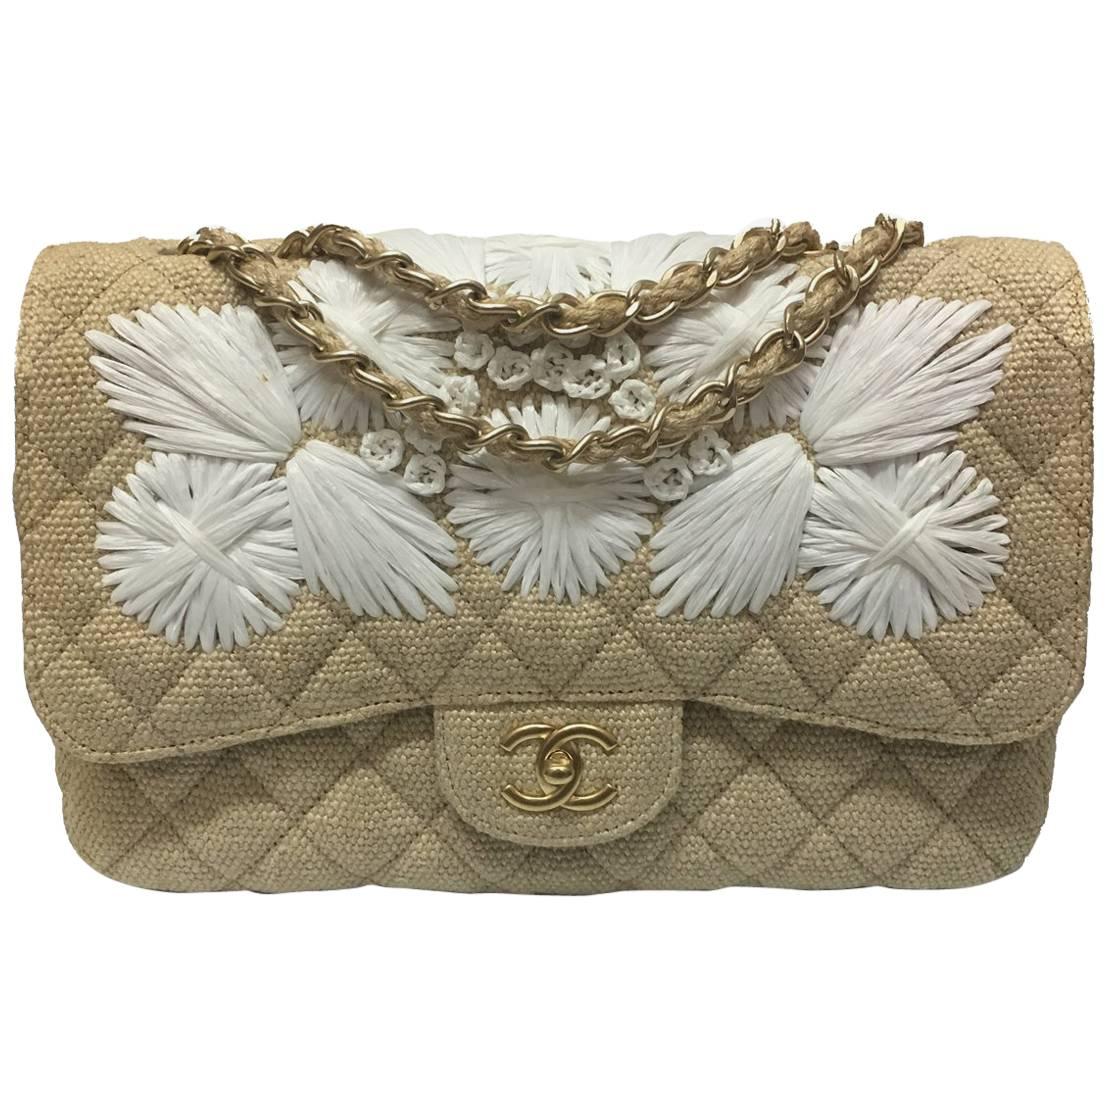 Chanel Tan Quilted Soft Raffia Woven Jumbo Classic Flap Shoulder Bag 